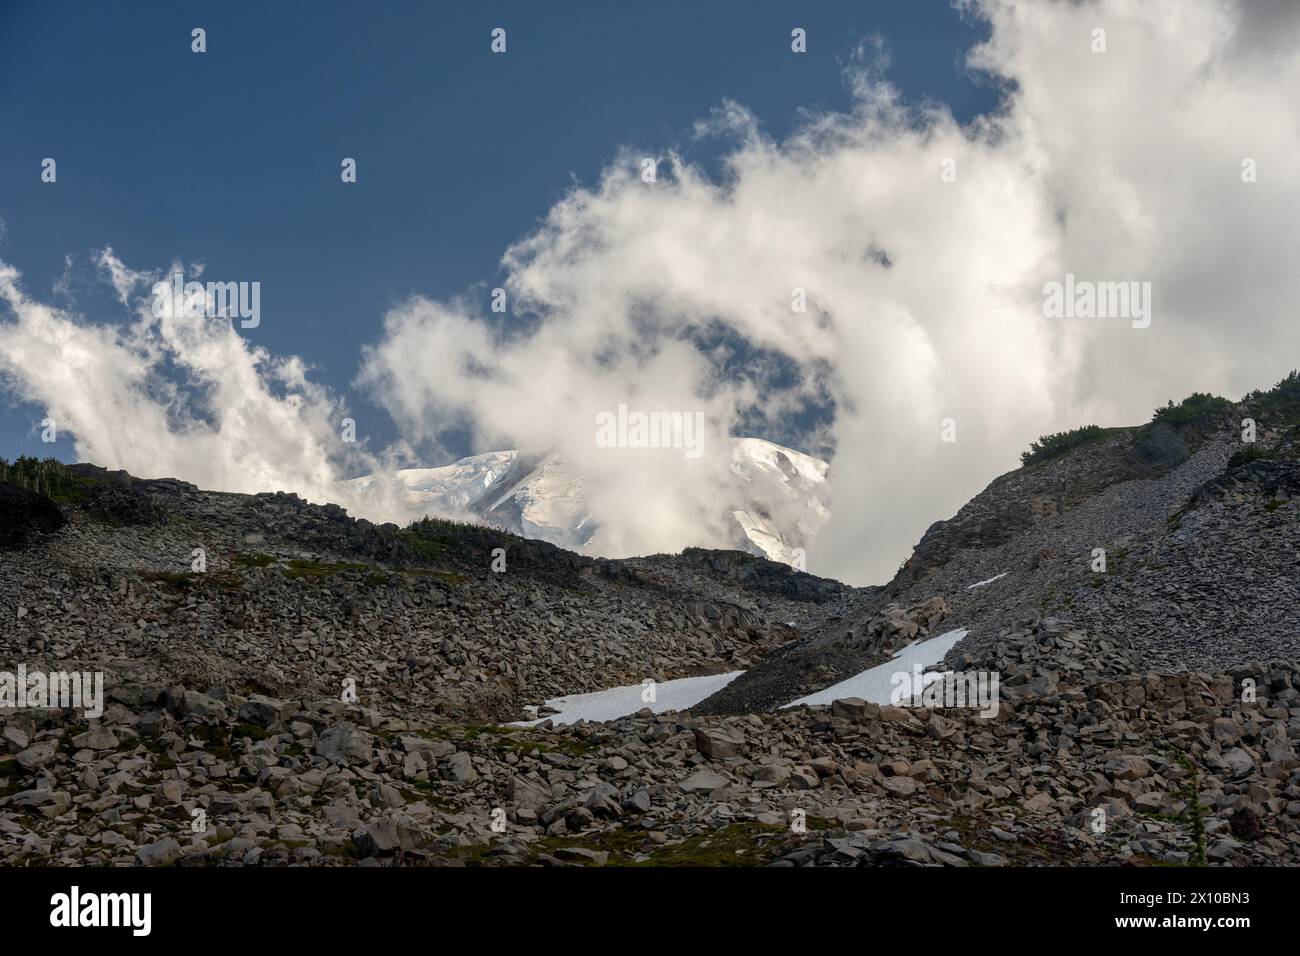 Looking Up To A Cloudy Mount Rainier From Spray Park on summer afternoon Stock Photo